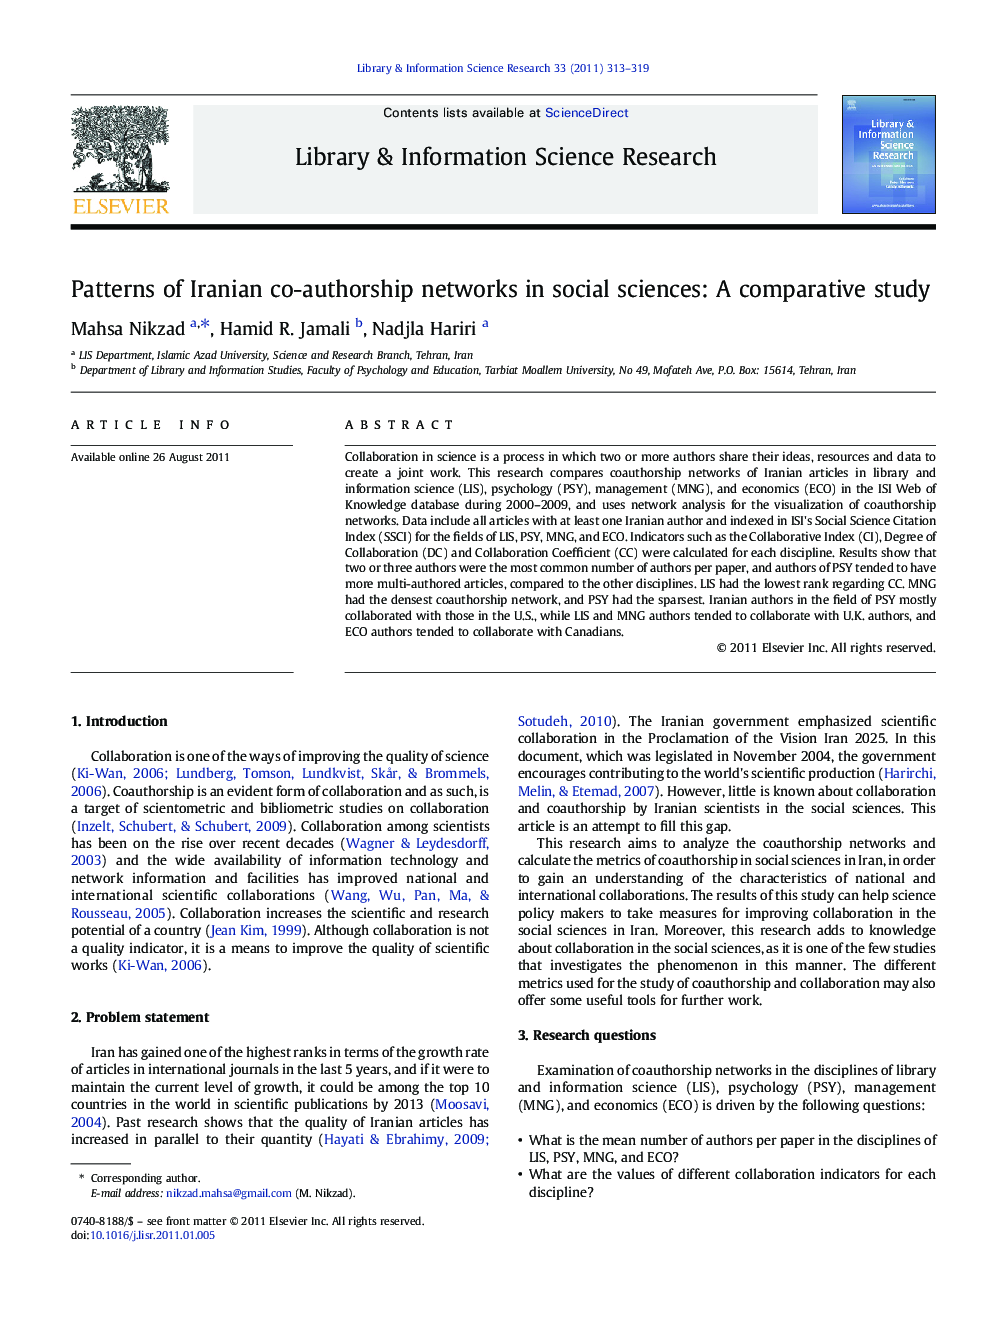 Patterns of Iranian co-authorship networks in social sciences: A comparative study